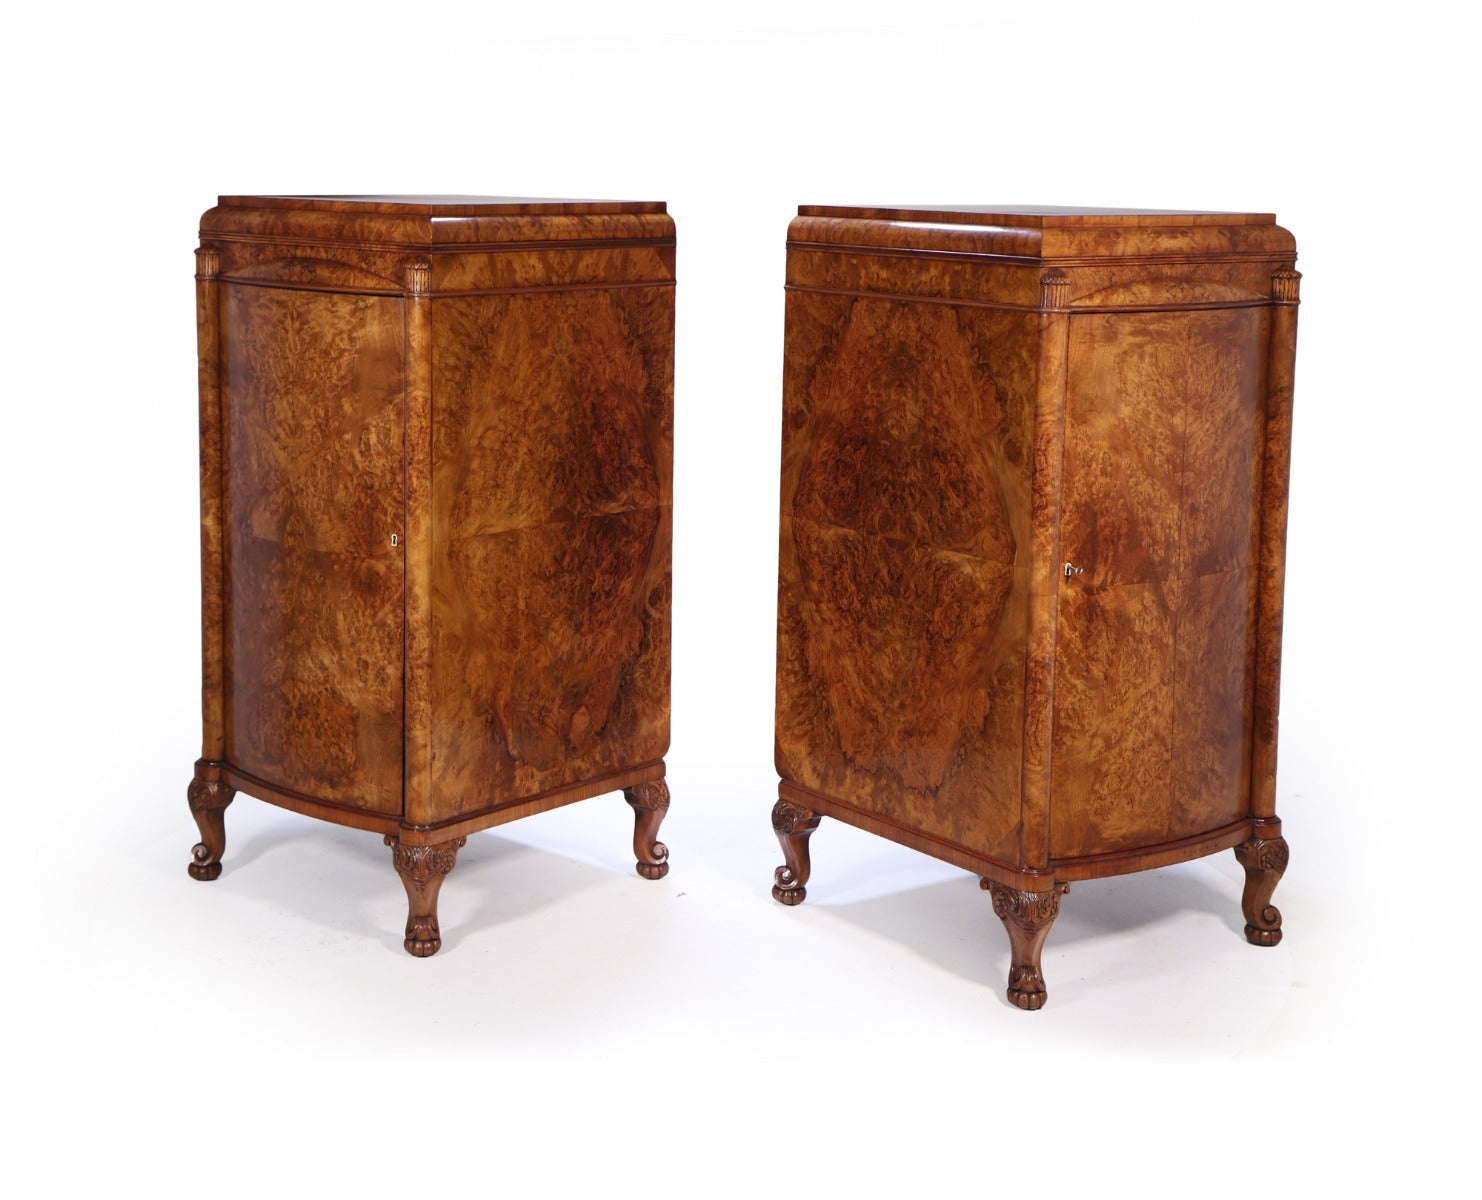 Pair of Large Art Deco Side Cabinets in Burr Walnut – The Furniture Rooms